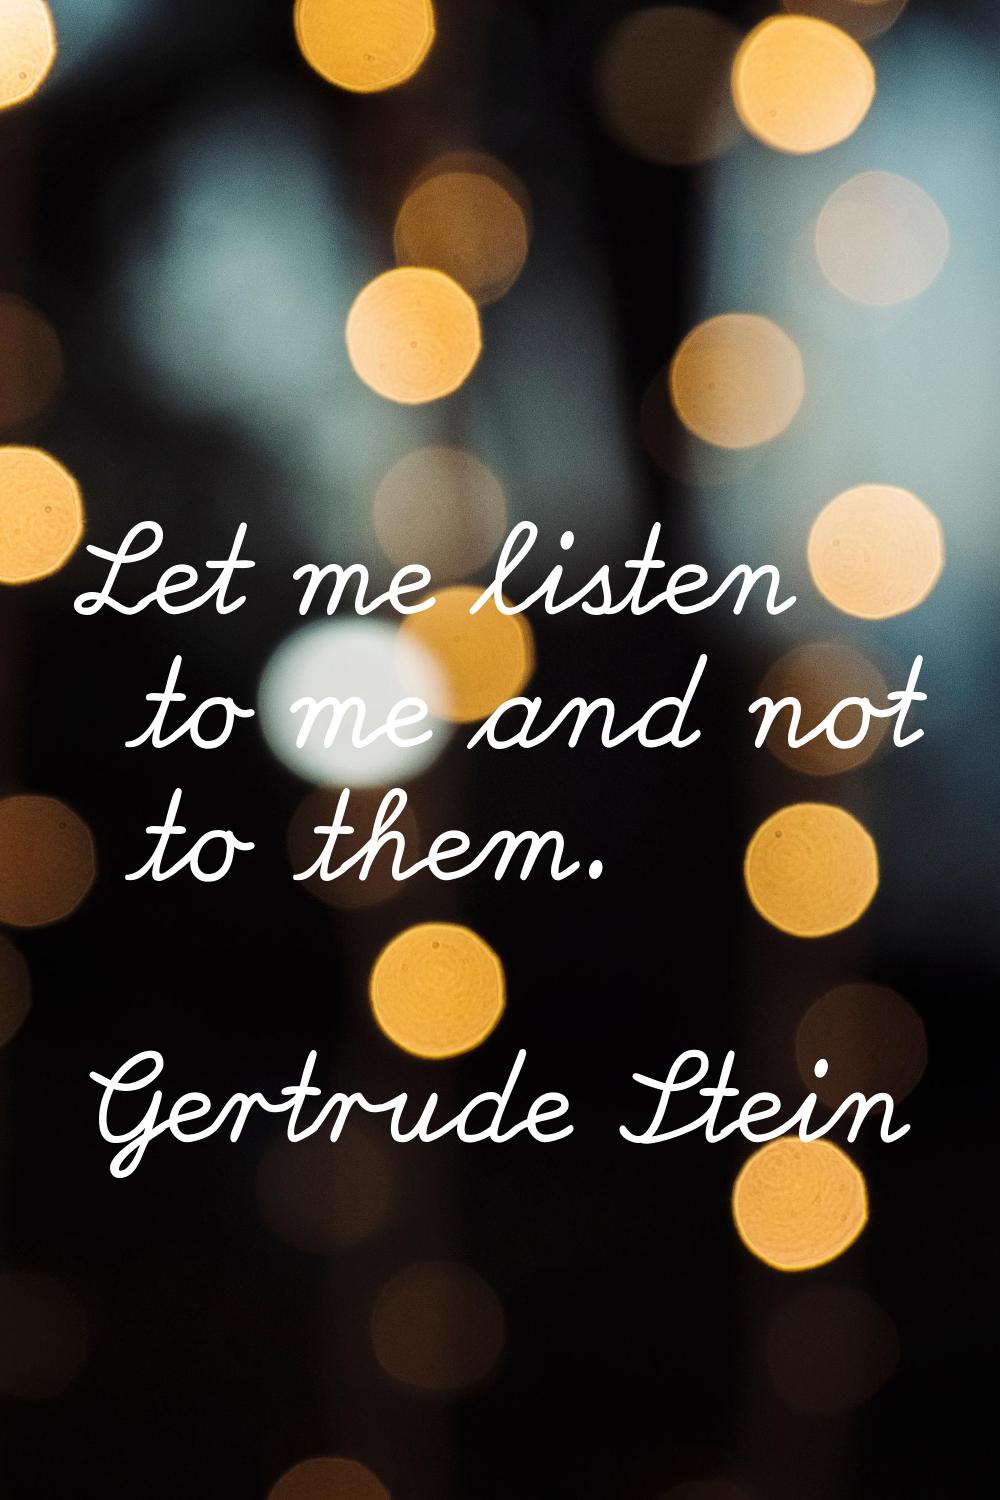 Let me listen to me and not to them.